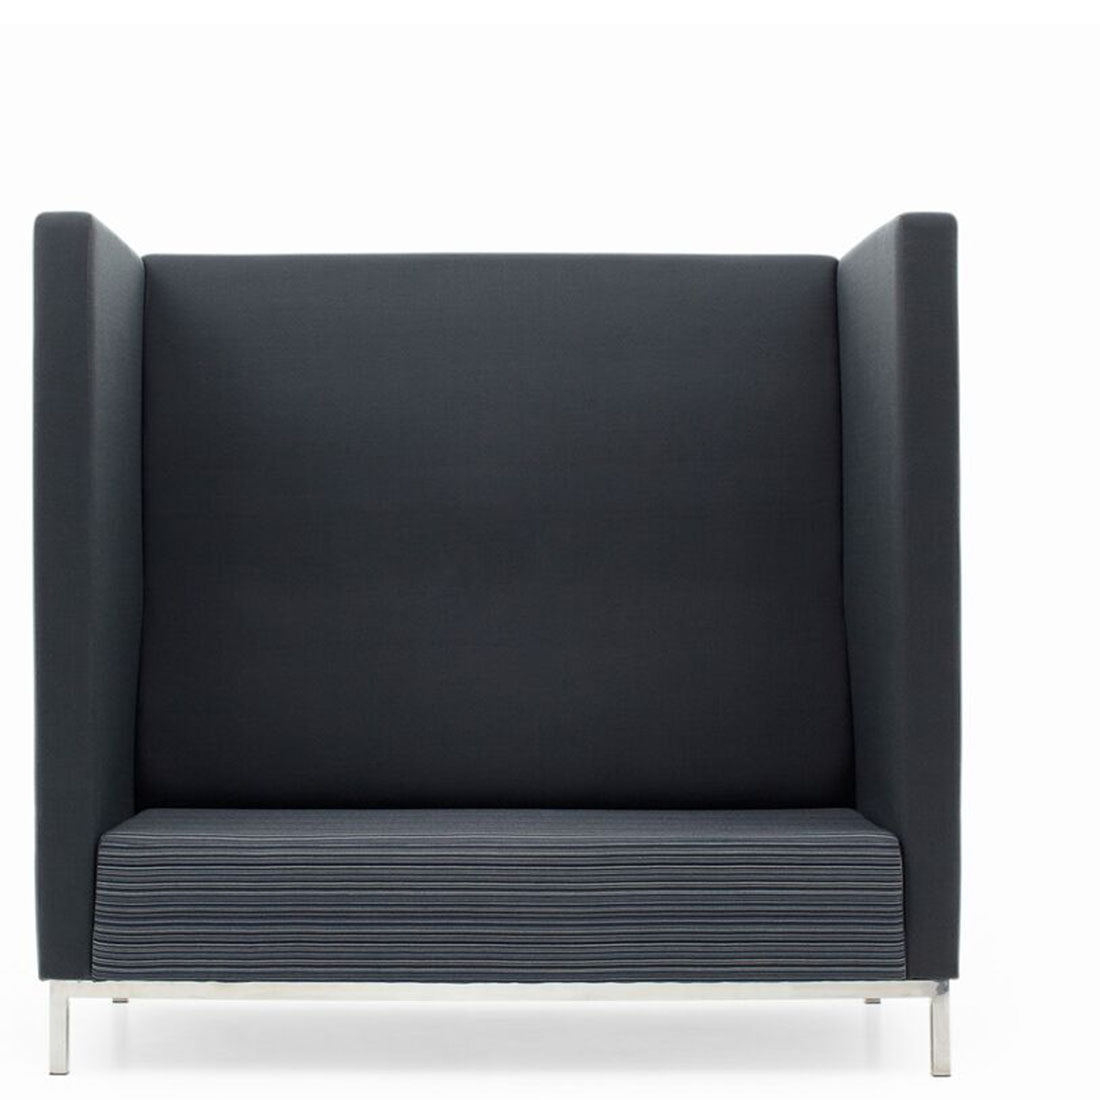 Quiet Lounge Chair 2 Seater - switchoffice.com.au